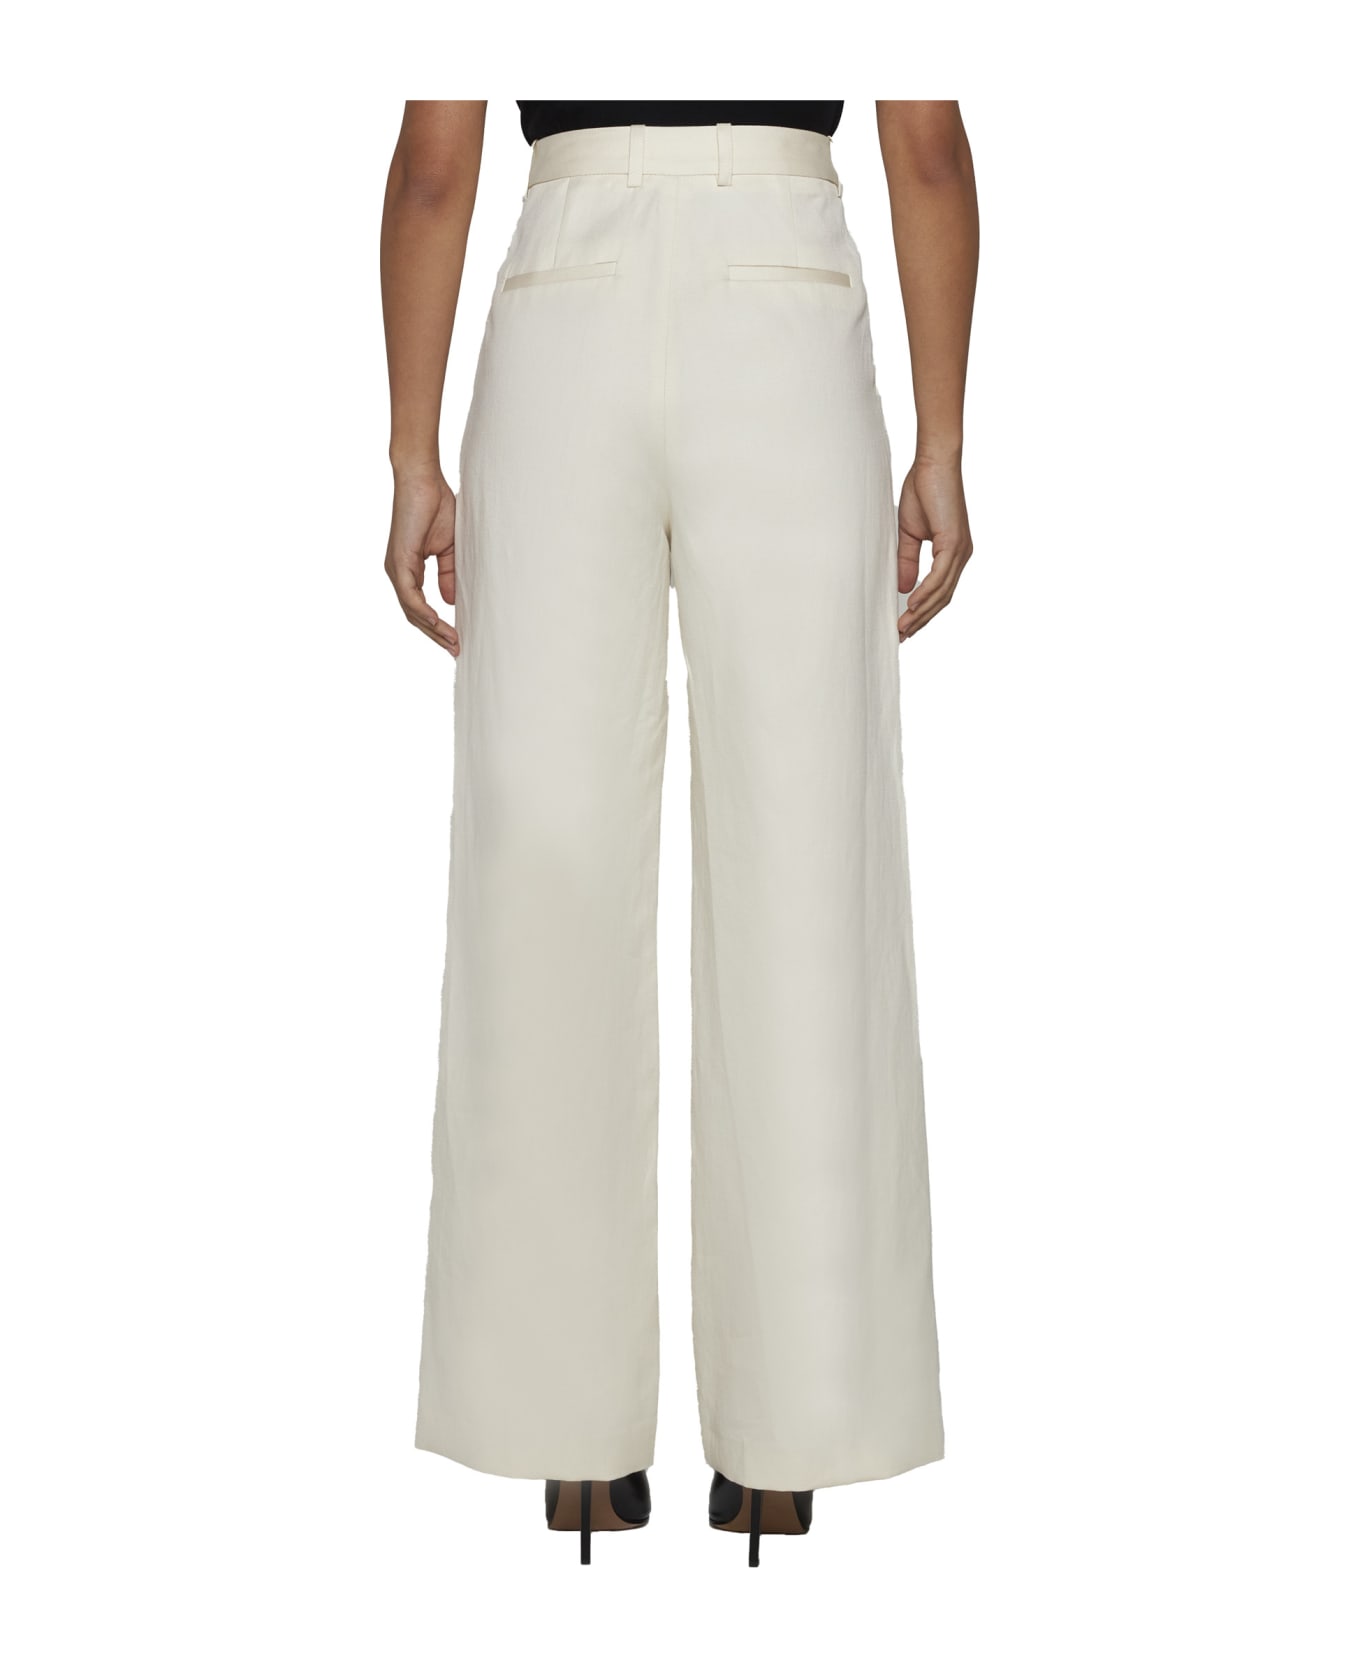 Loulou Studio Pants - Forest ivory